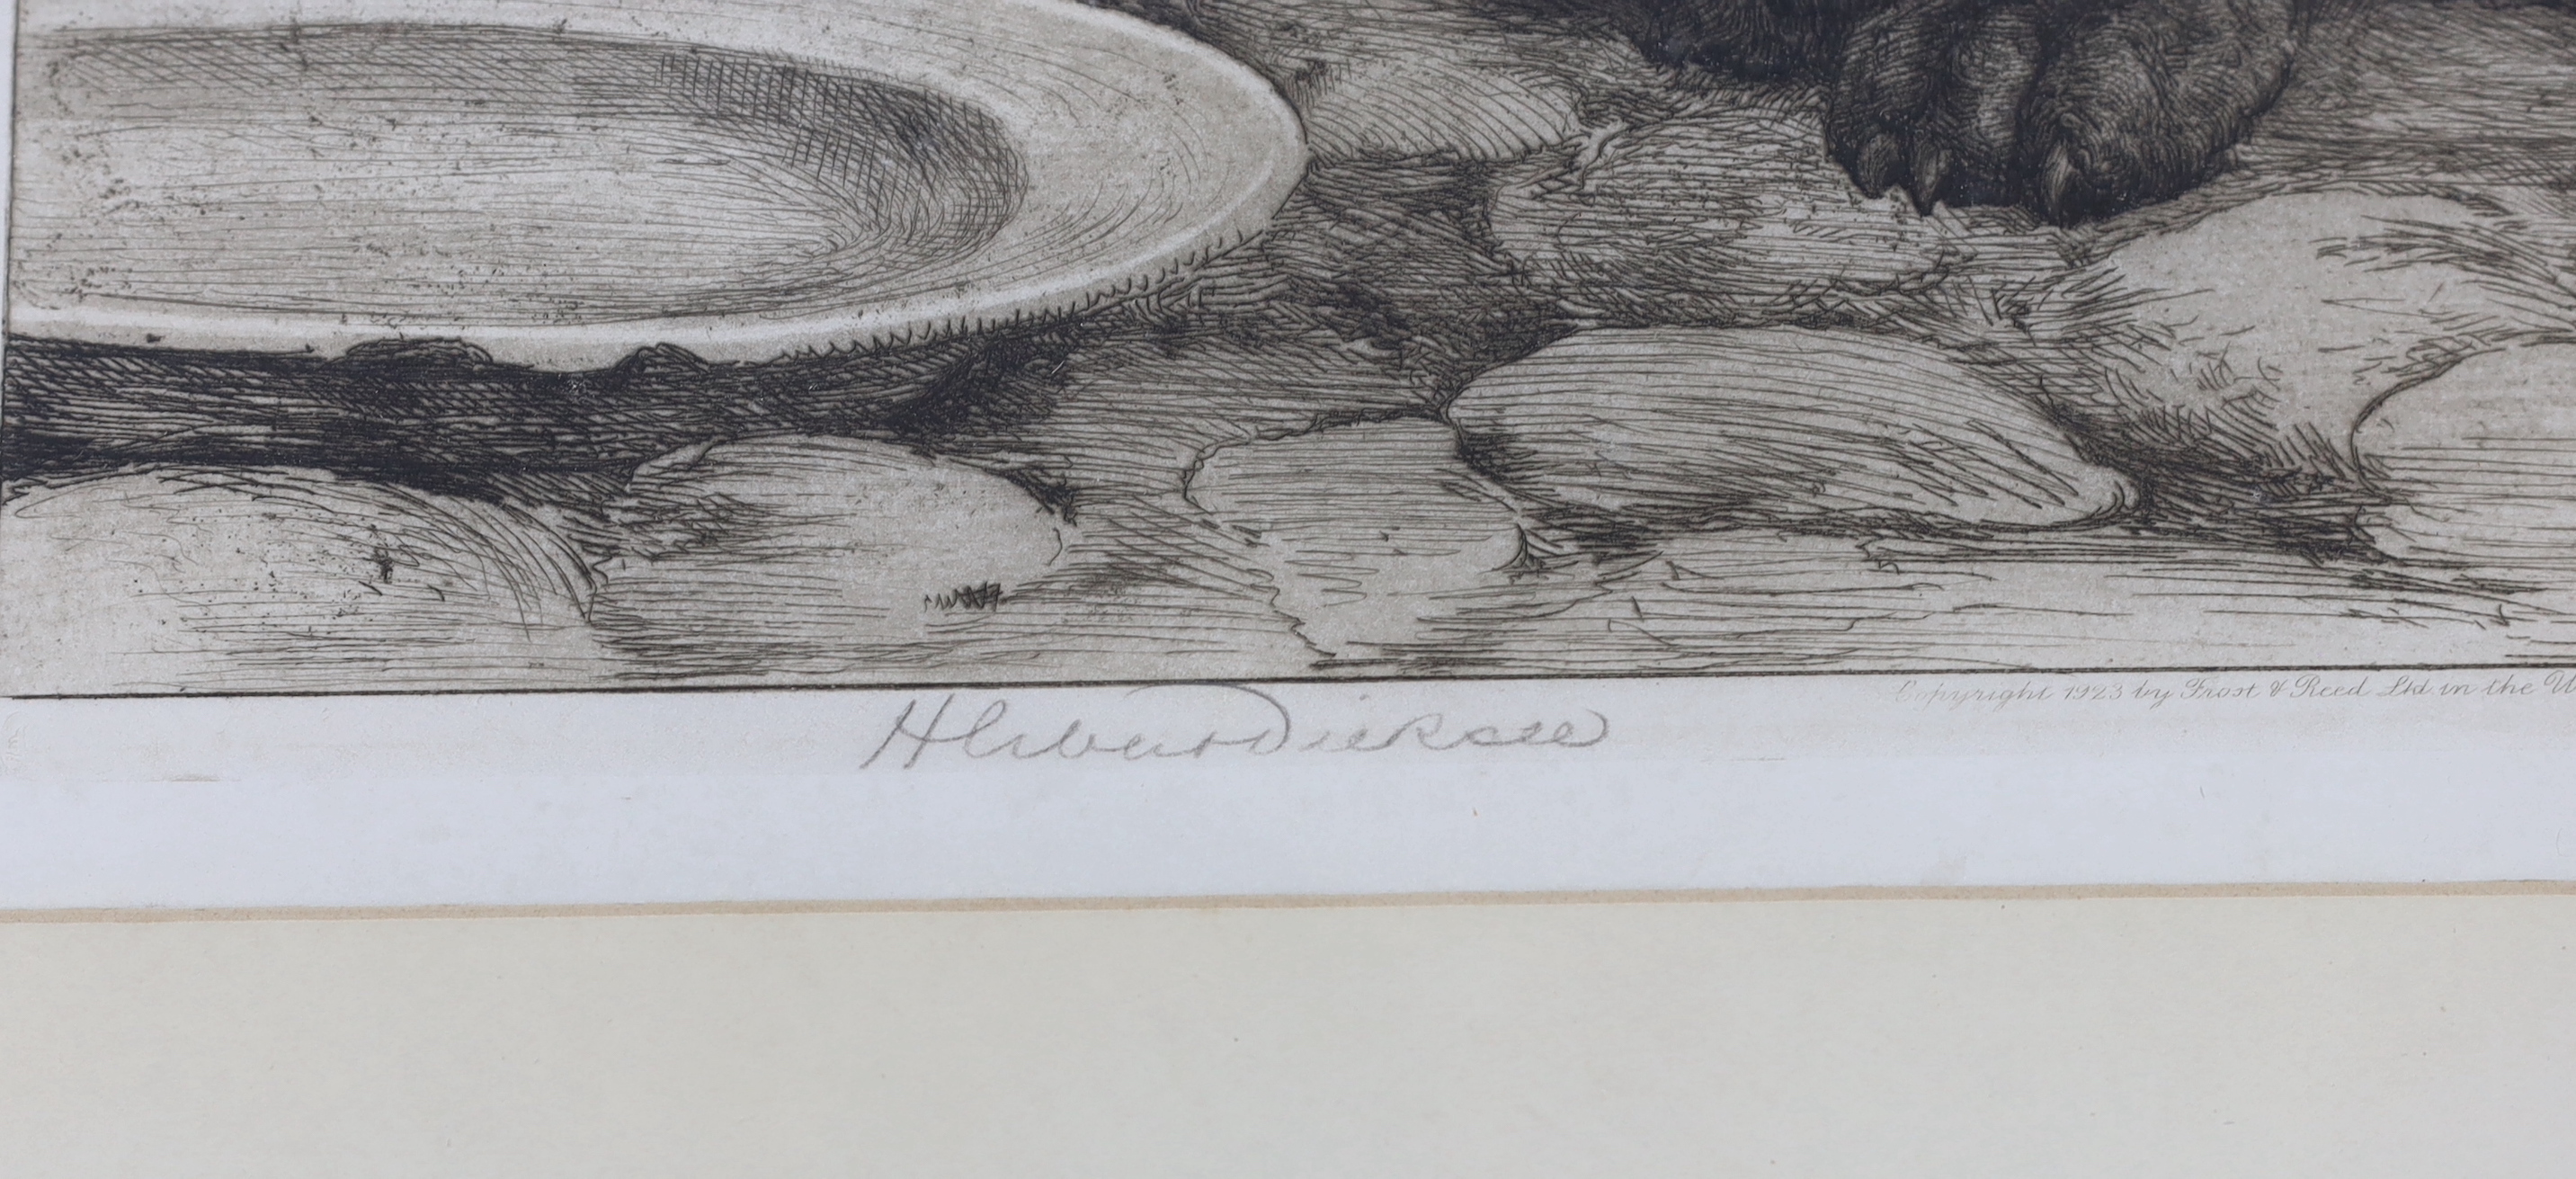 Herbert Dicksee (1862-1942), etching, 'Forgotten', signed in pencil, publ. 1923, inscribed label verso, 30 x 41cm